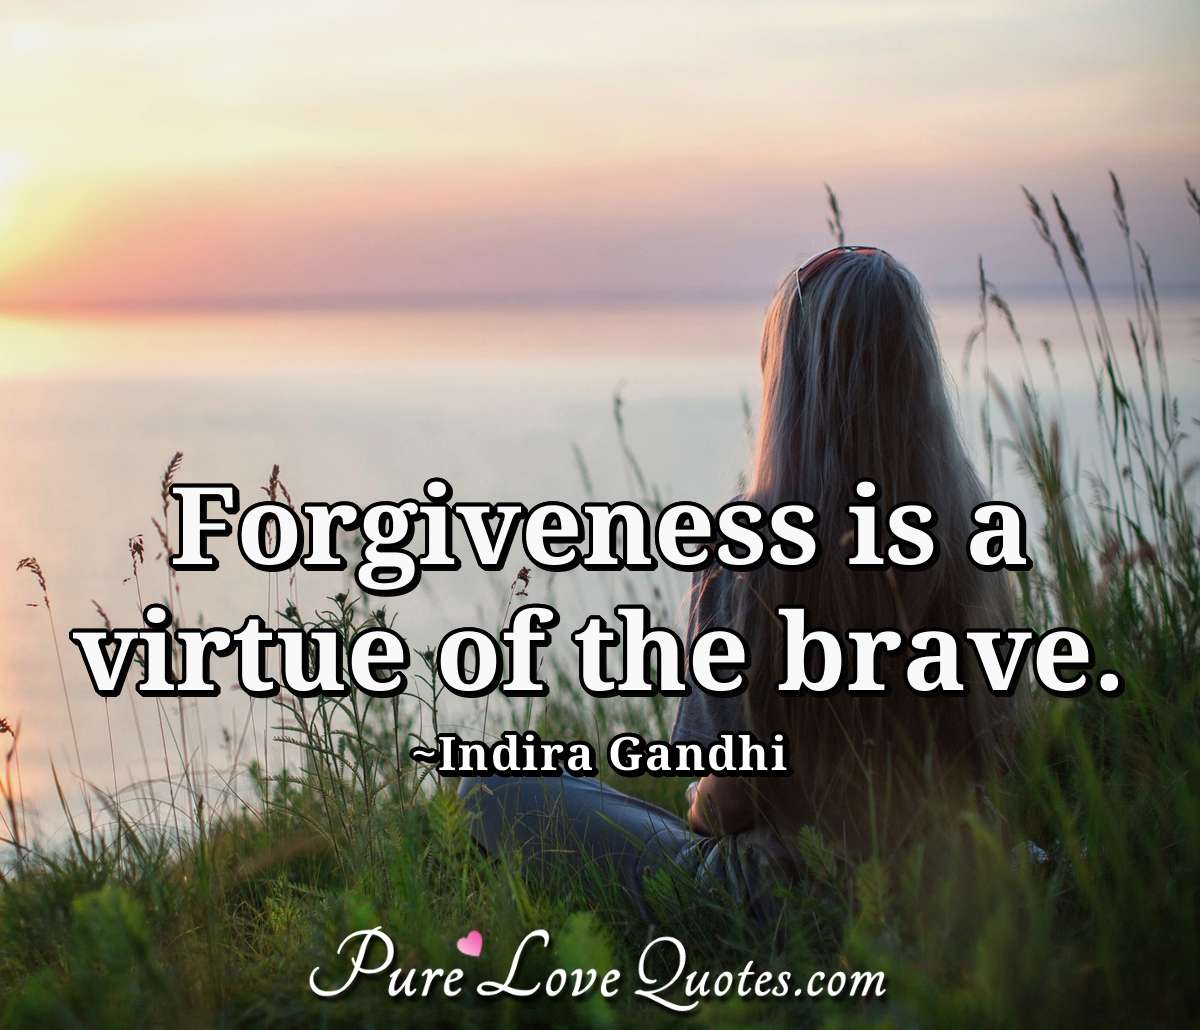 Forgiveness is a virtue of the brave. - Indira Gandhi